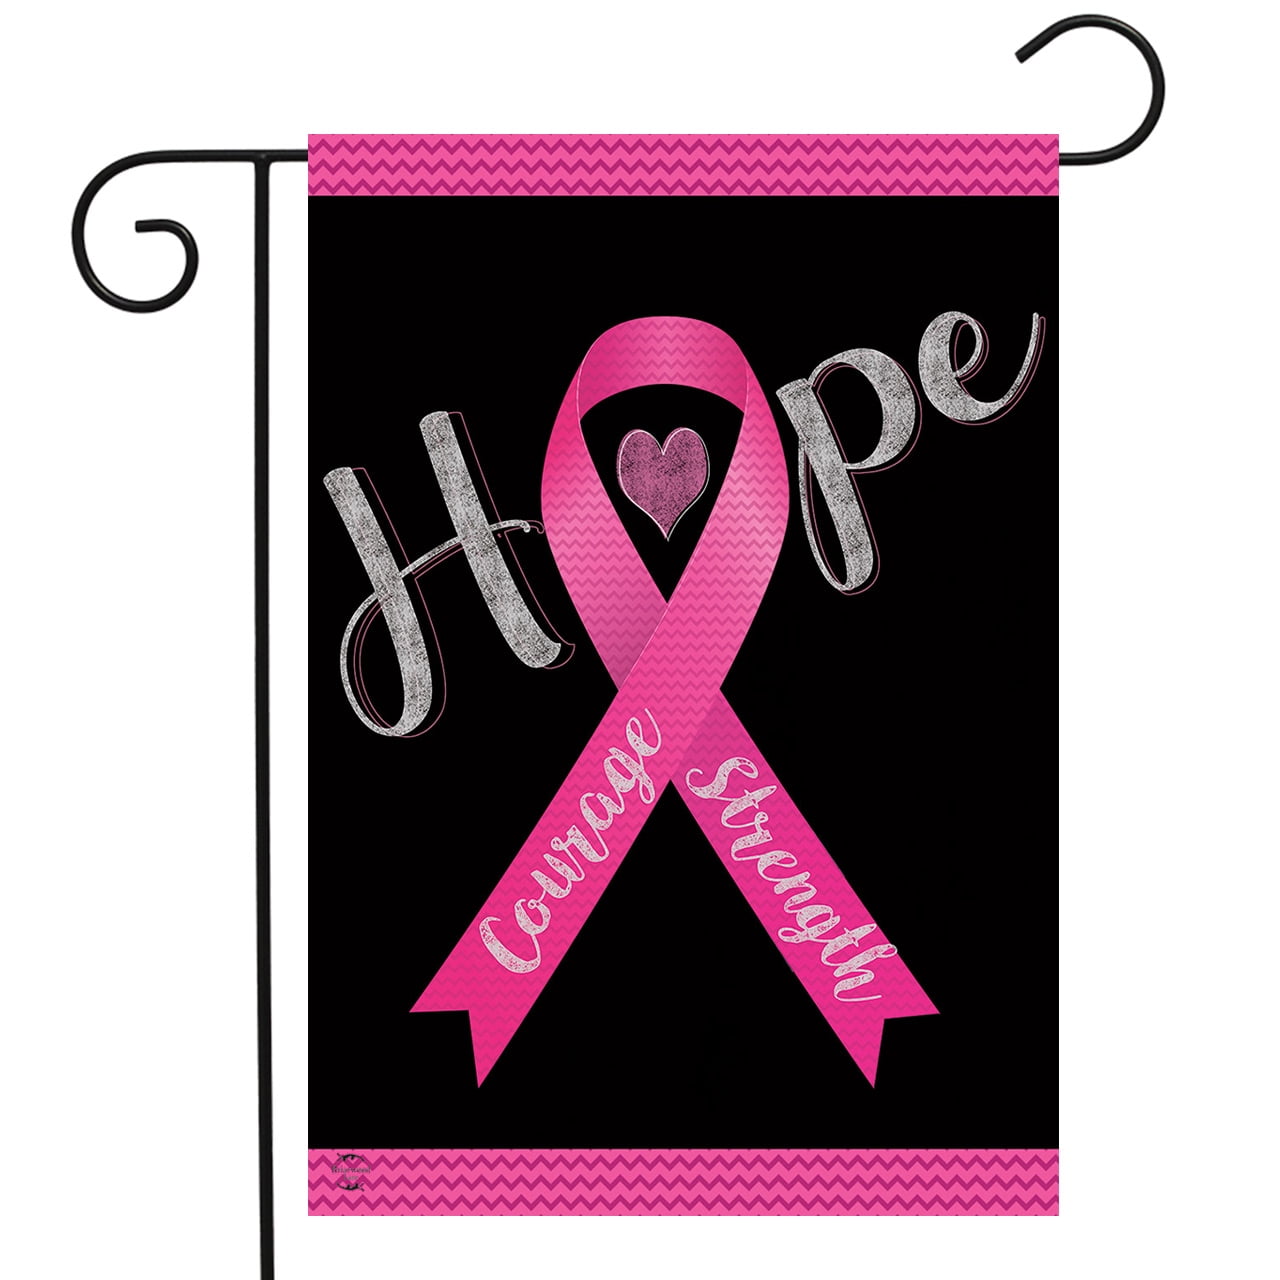 Hope, Courage, Strength Garden Flag Breast Cancer Pink Ribbon 12.5